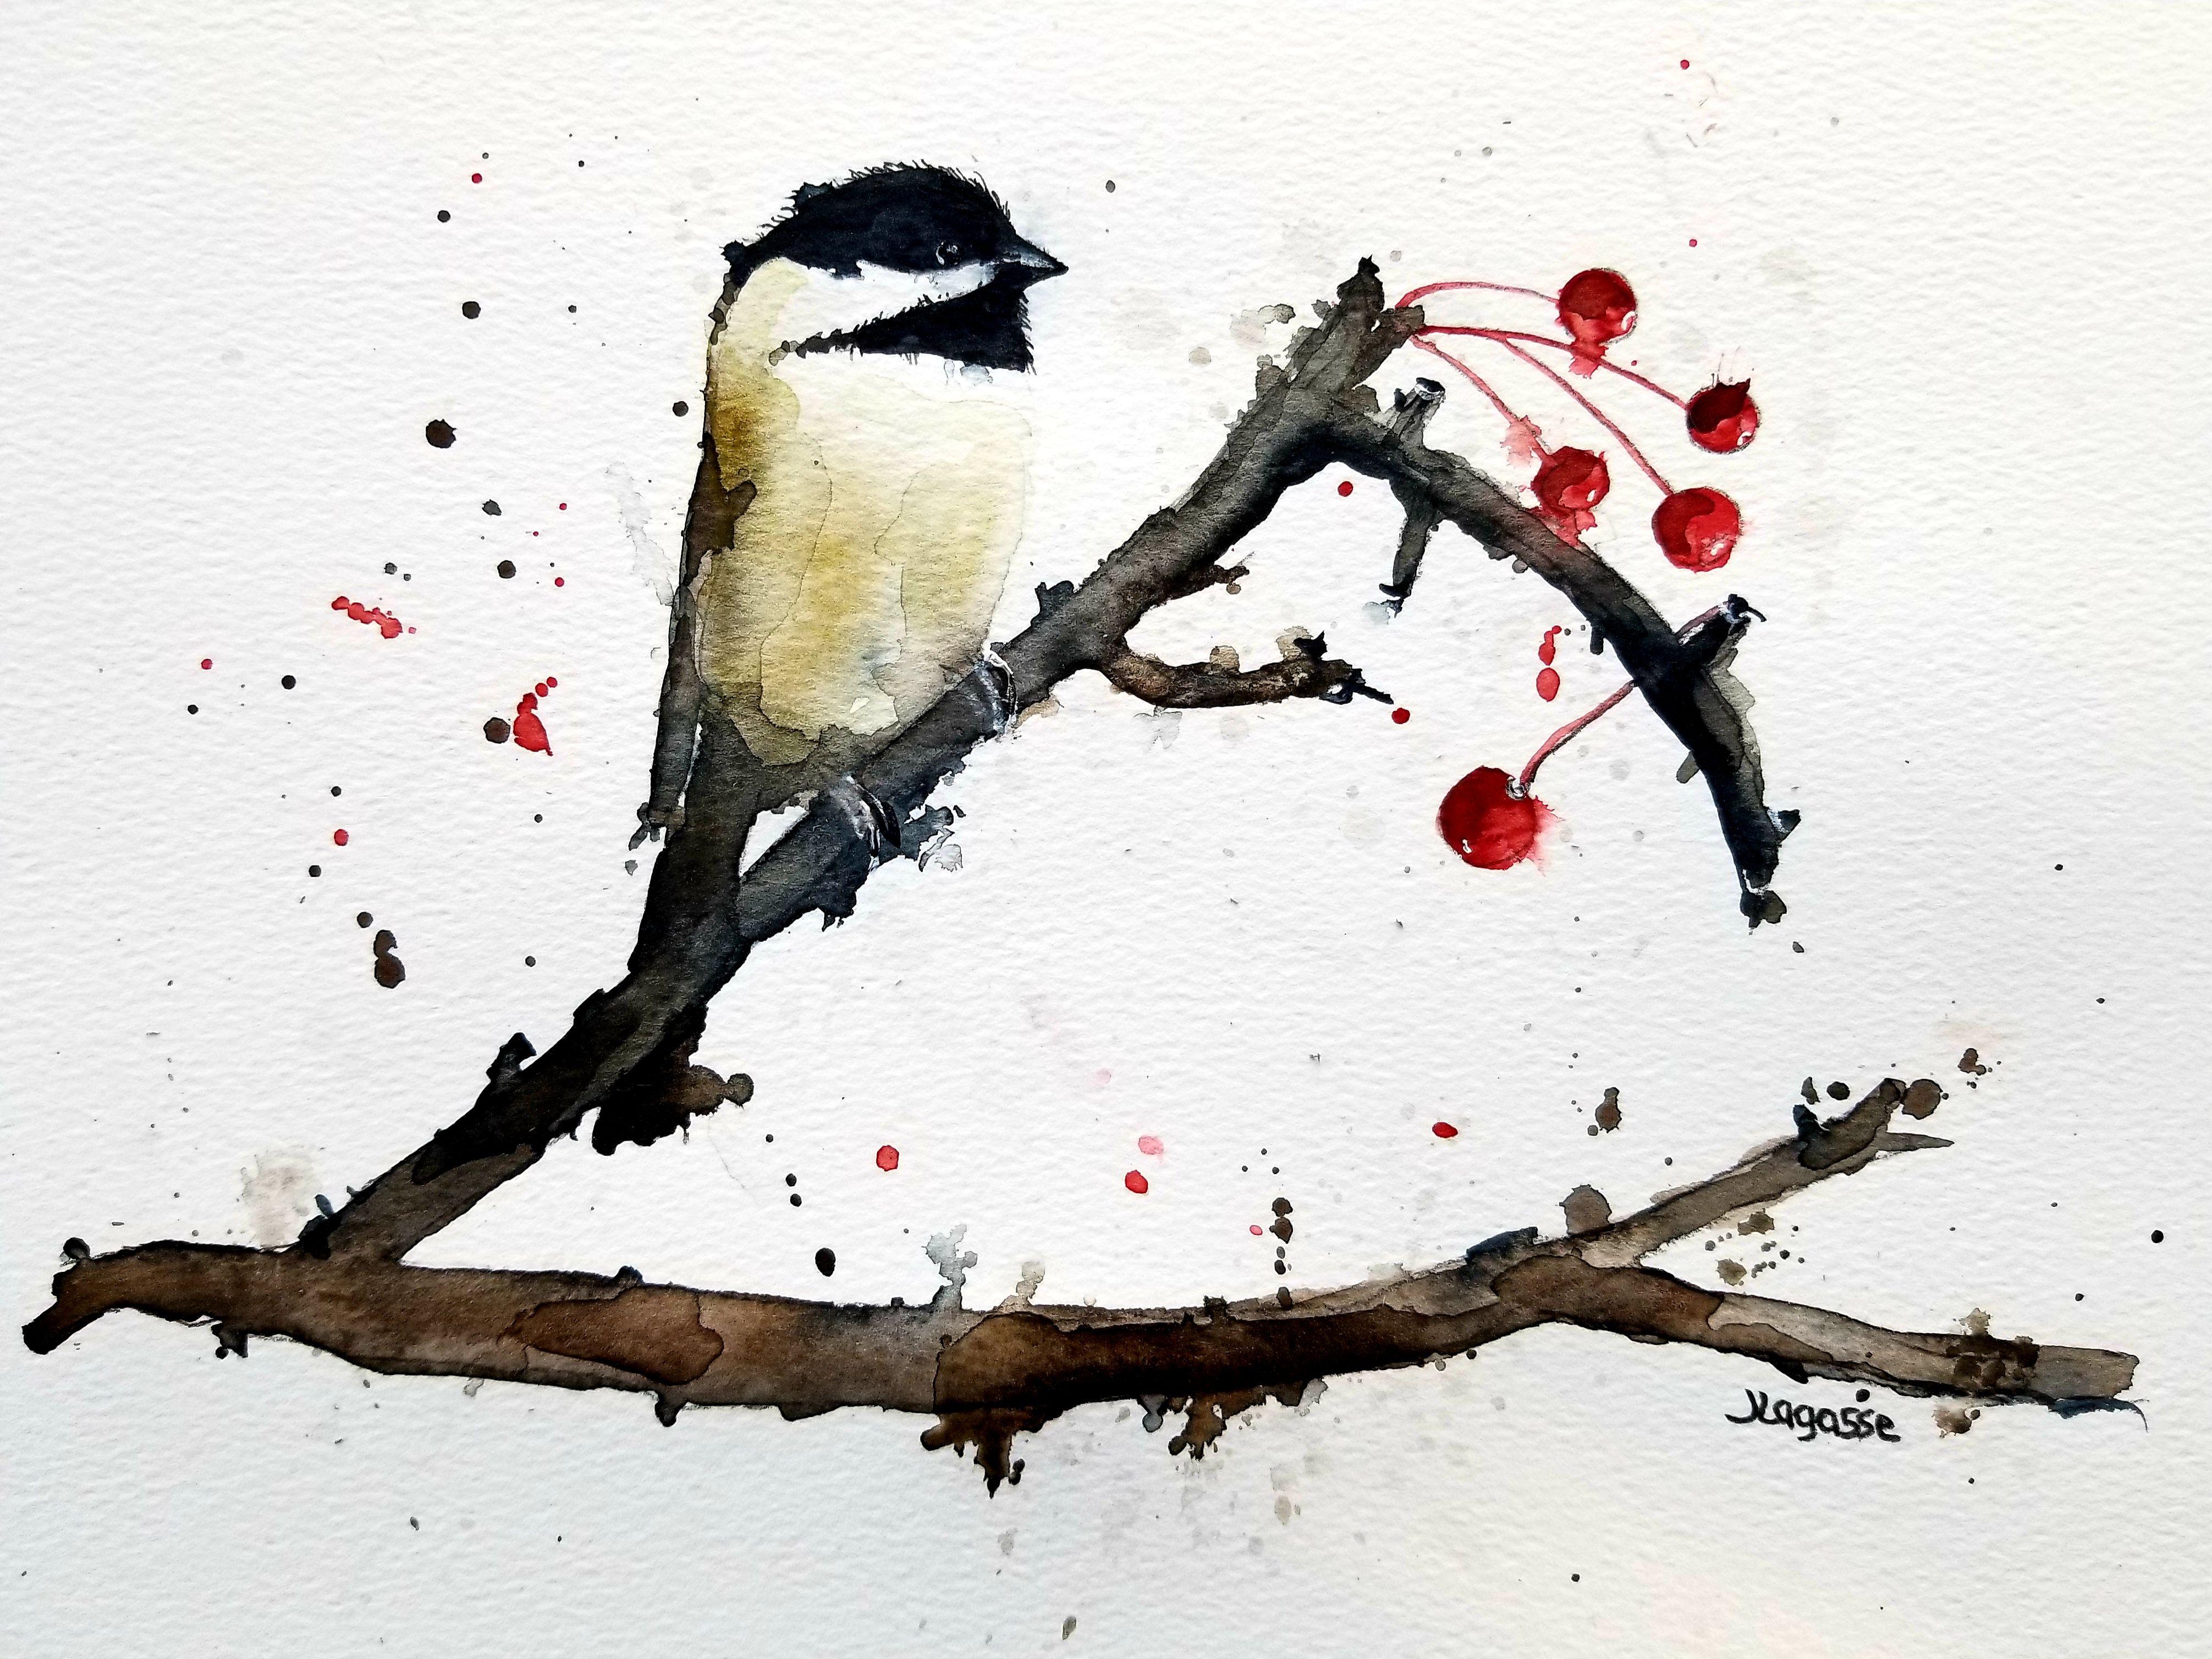 Chickadee, Painting, Watercolor on Watercolor Paper - Art by Jim Lagasse